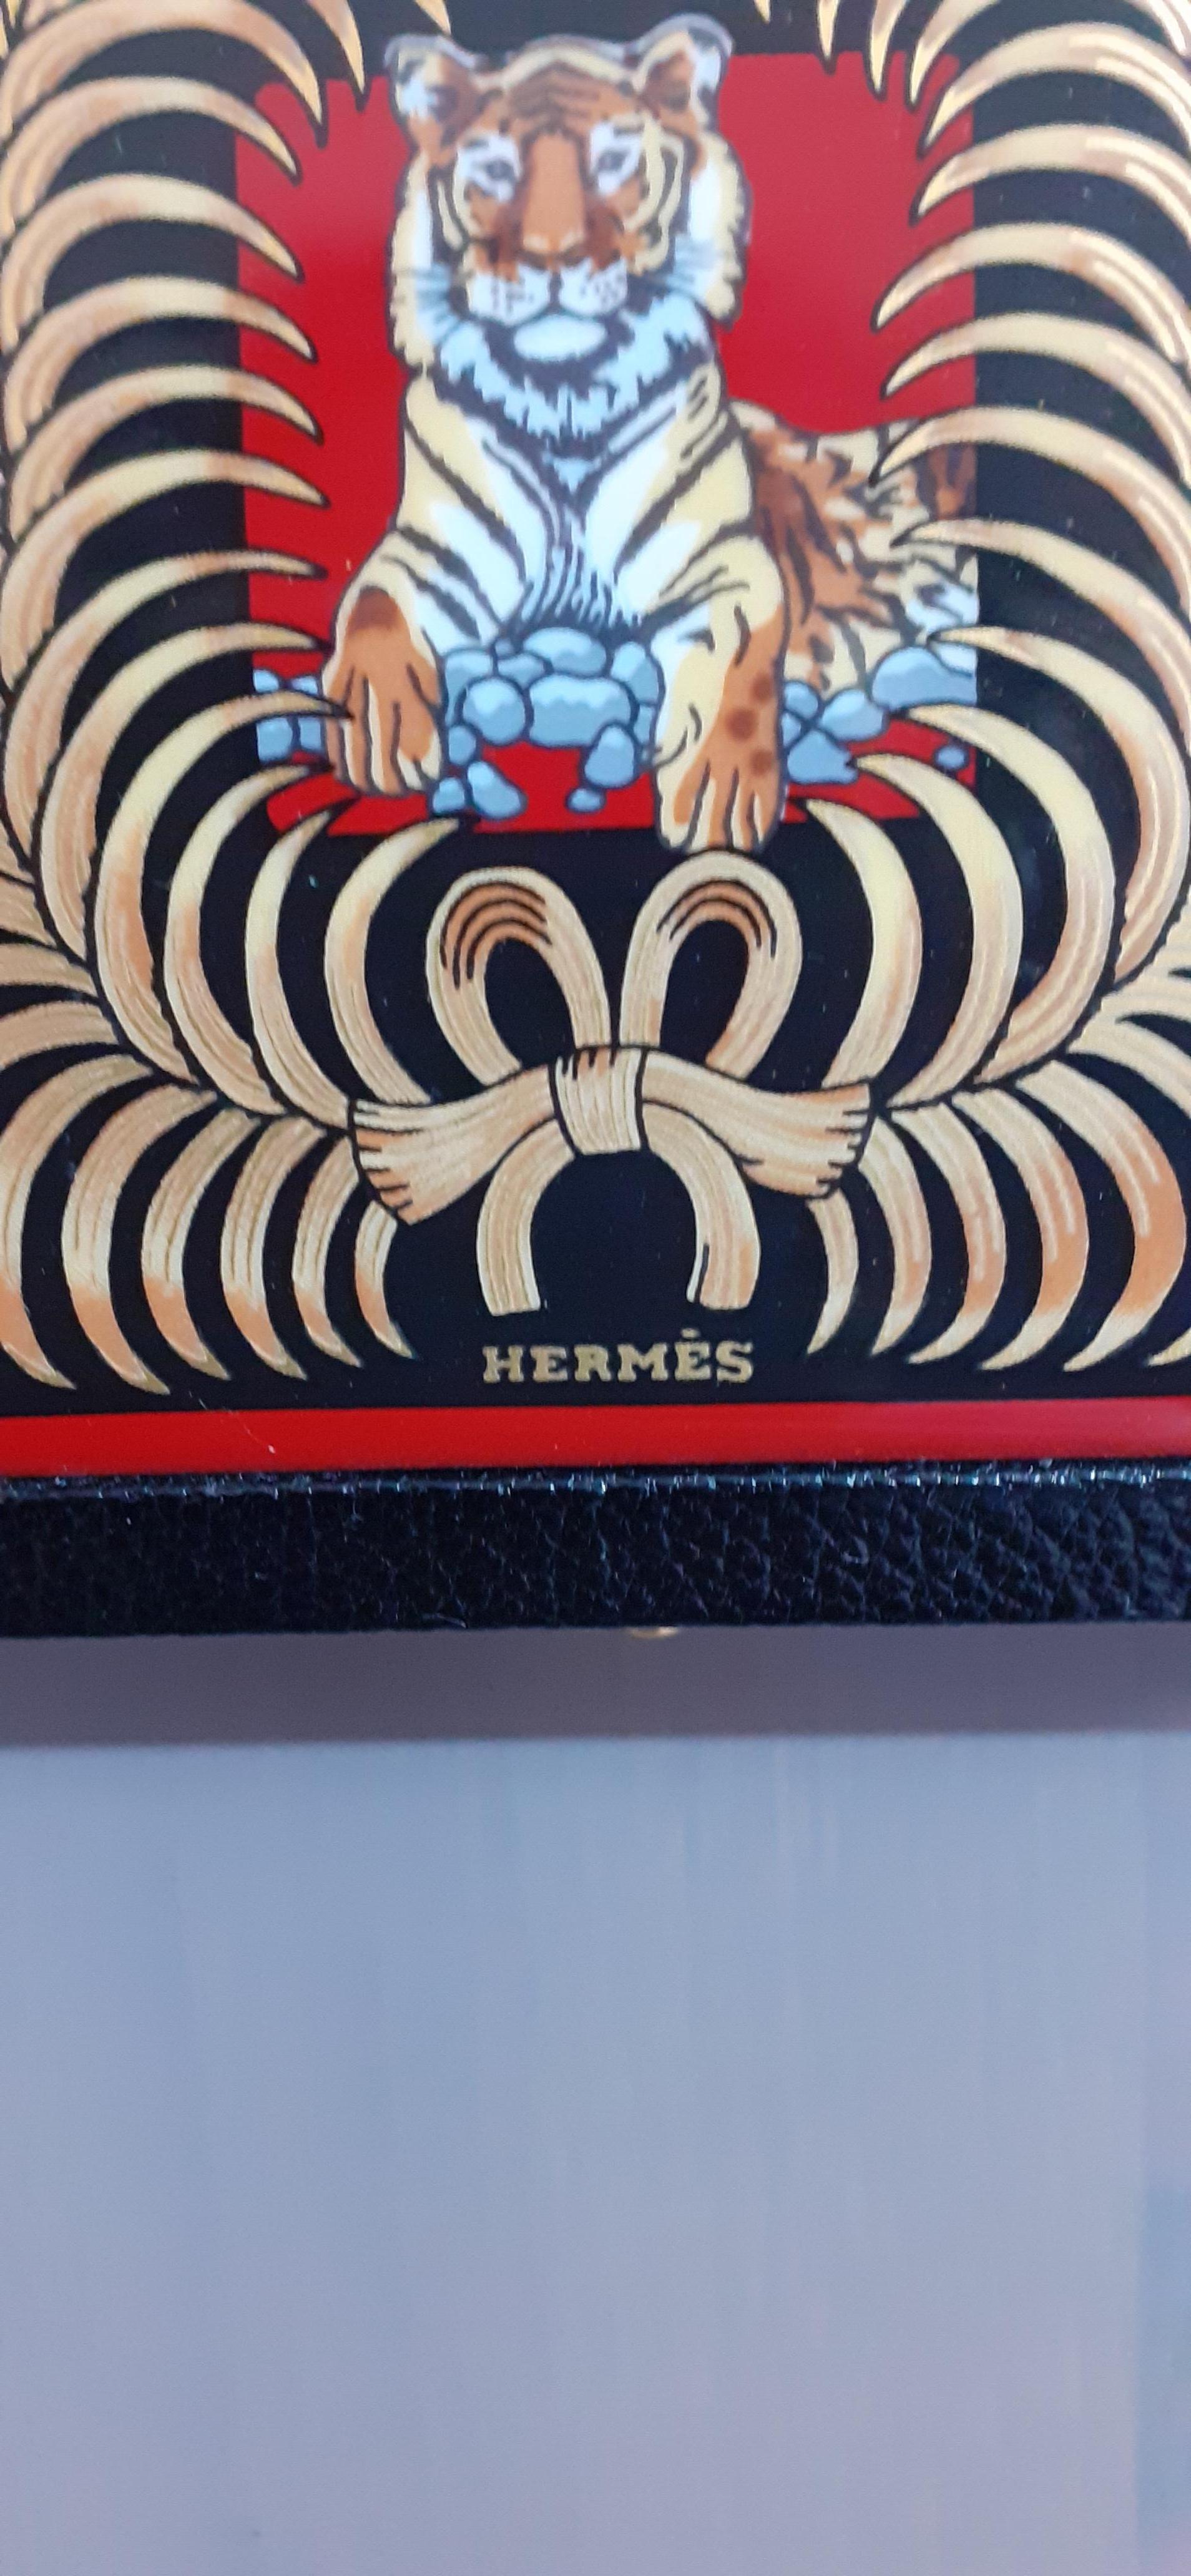 Exceptional Hermès Enamel and Leather Powder Compact Tigre Royal Print RARE For Sale 6